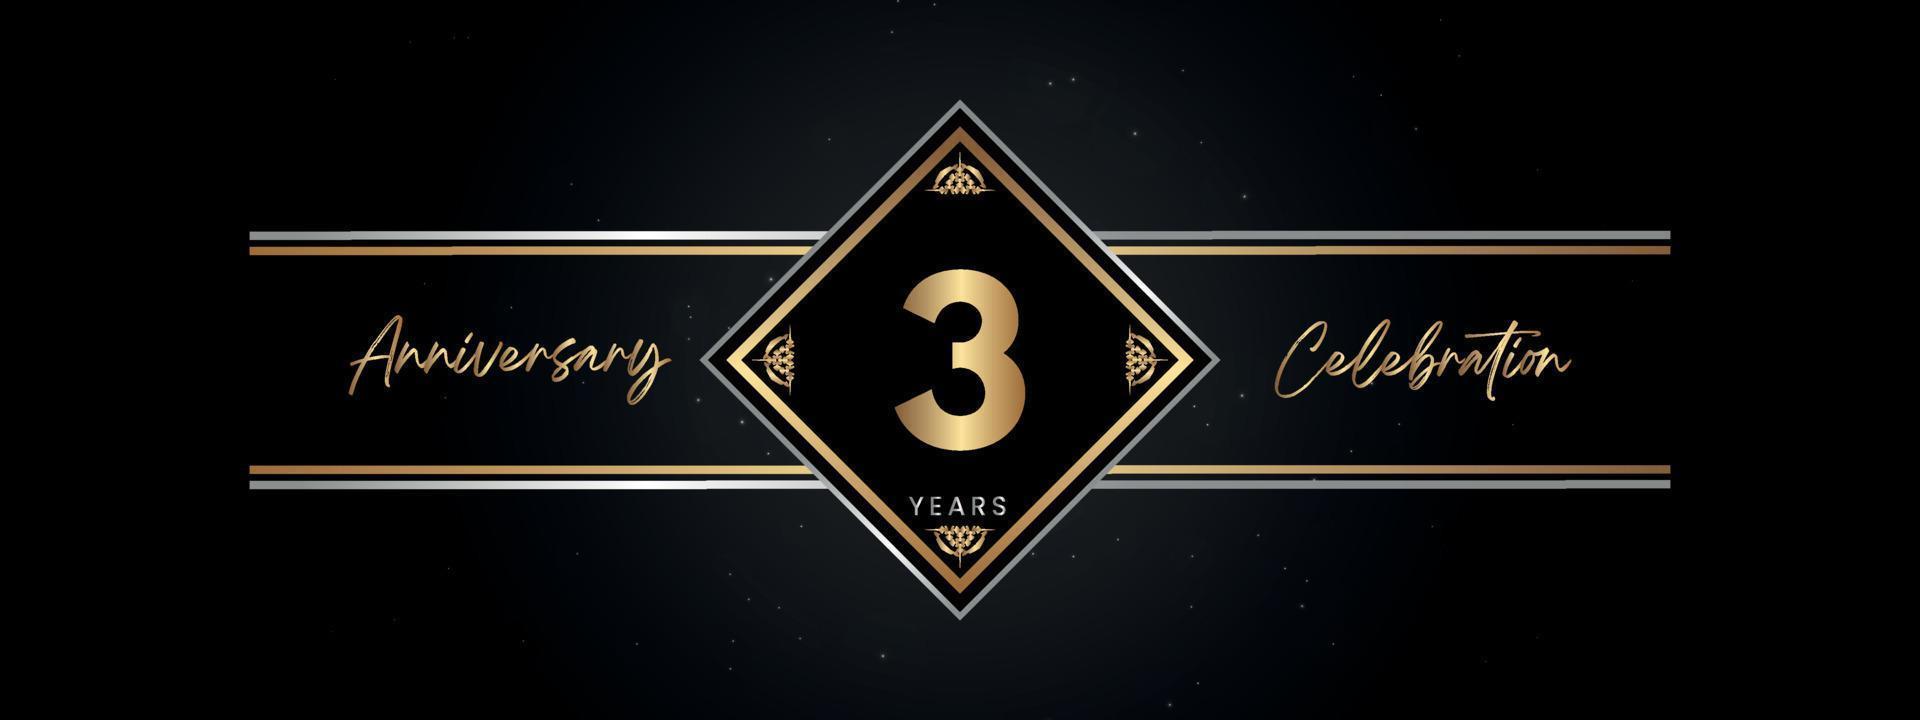 3 years anniversary golden color with decorative frame isolated on black background for anniversary celebration event, birthday party, brochure, greeting card. 3 Year Anniversary Template Design vector